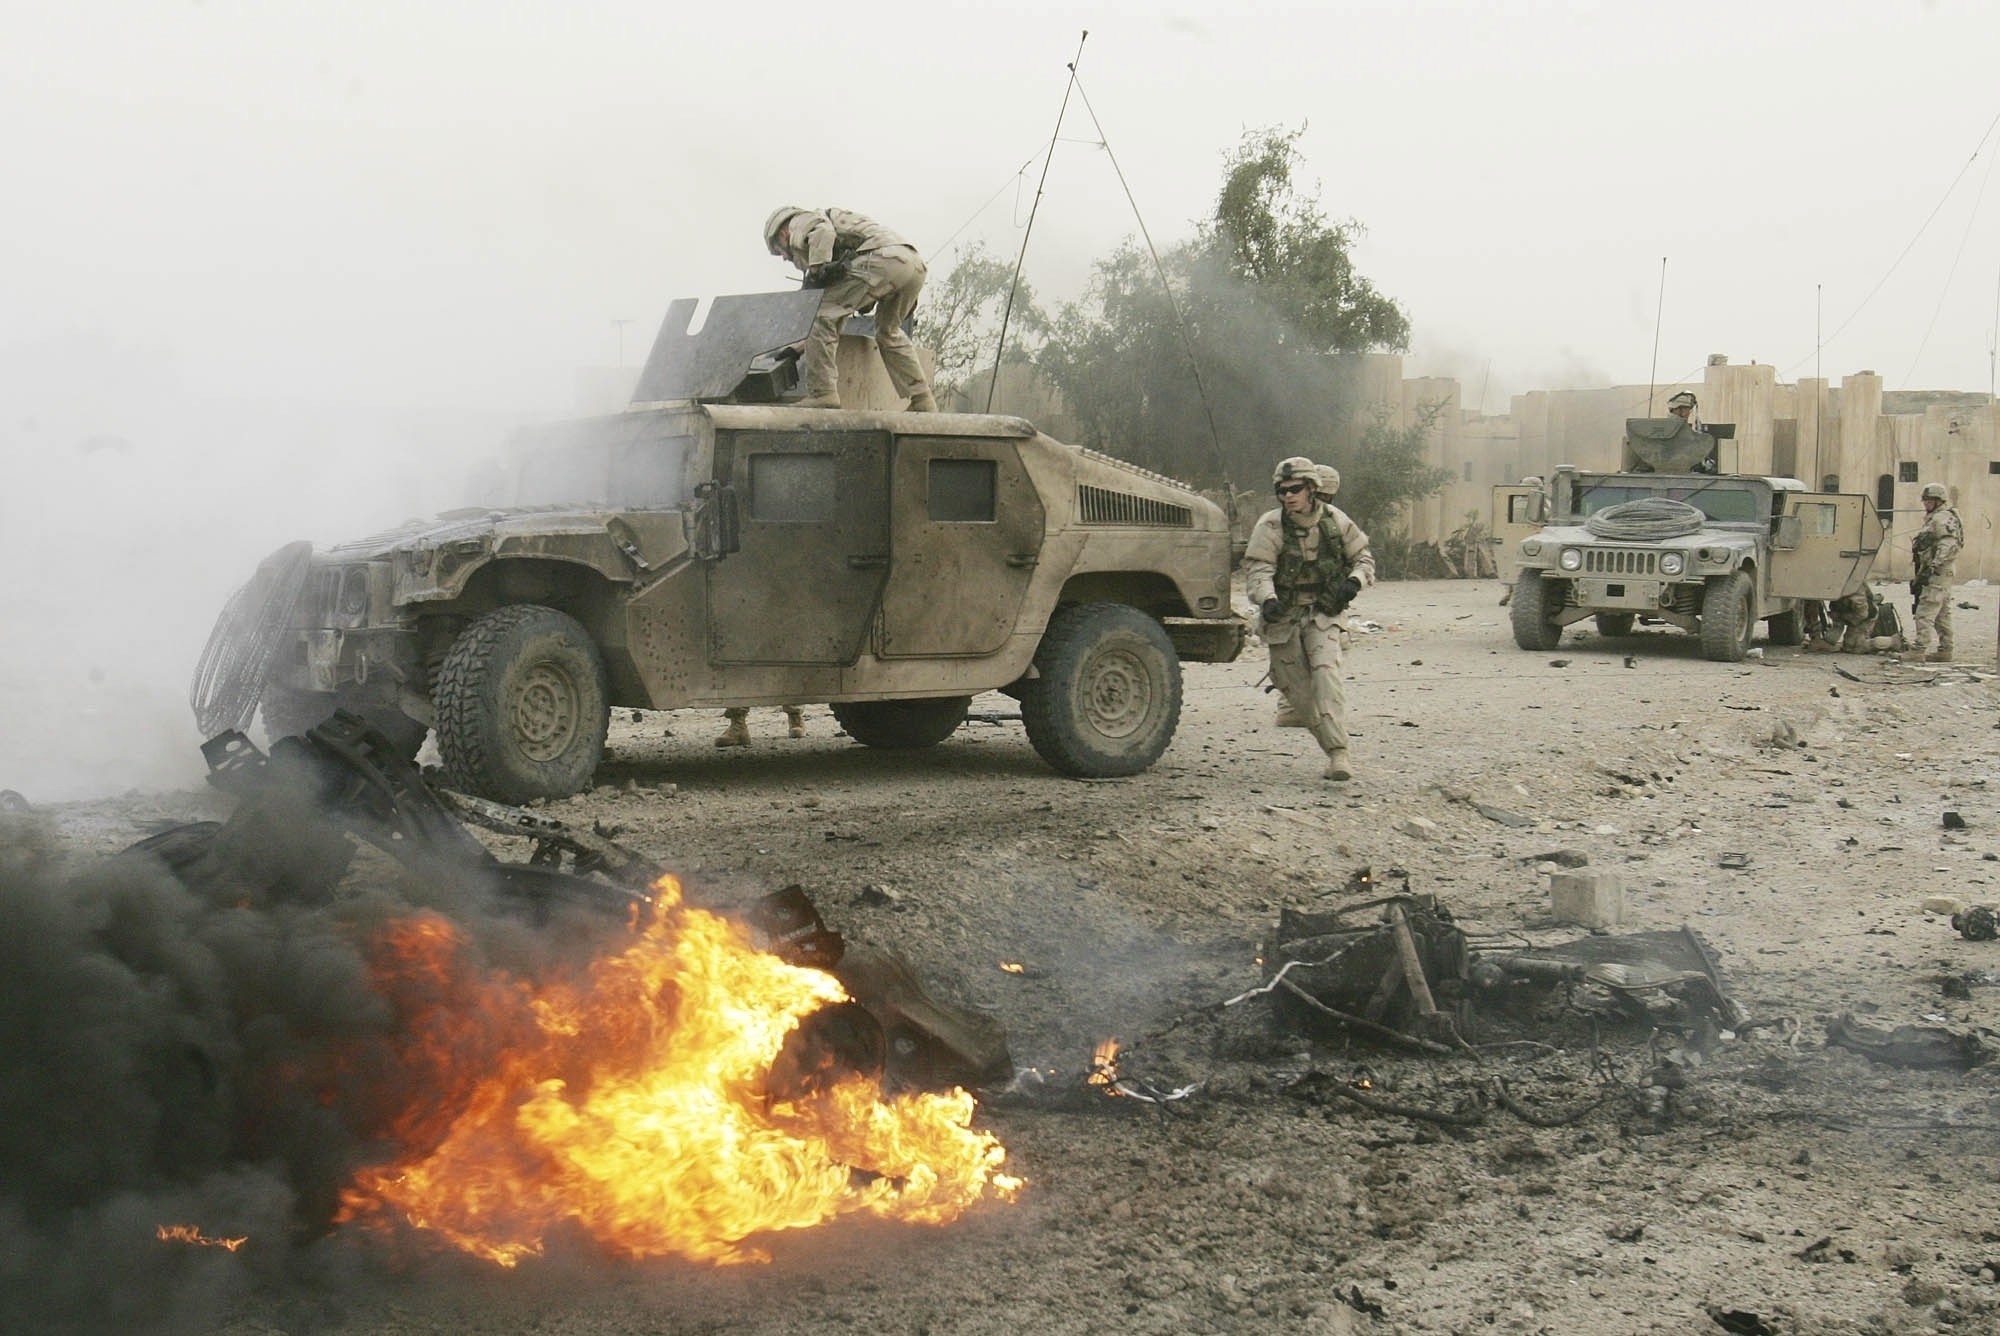 The 2003 US invasion led to a bloody insurgency